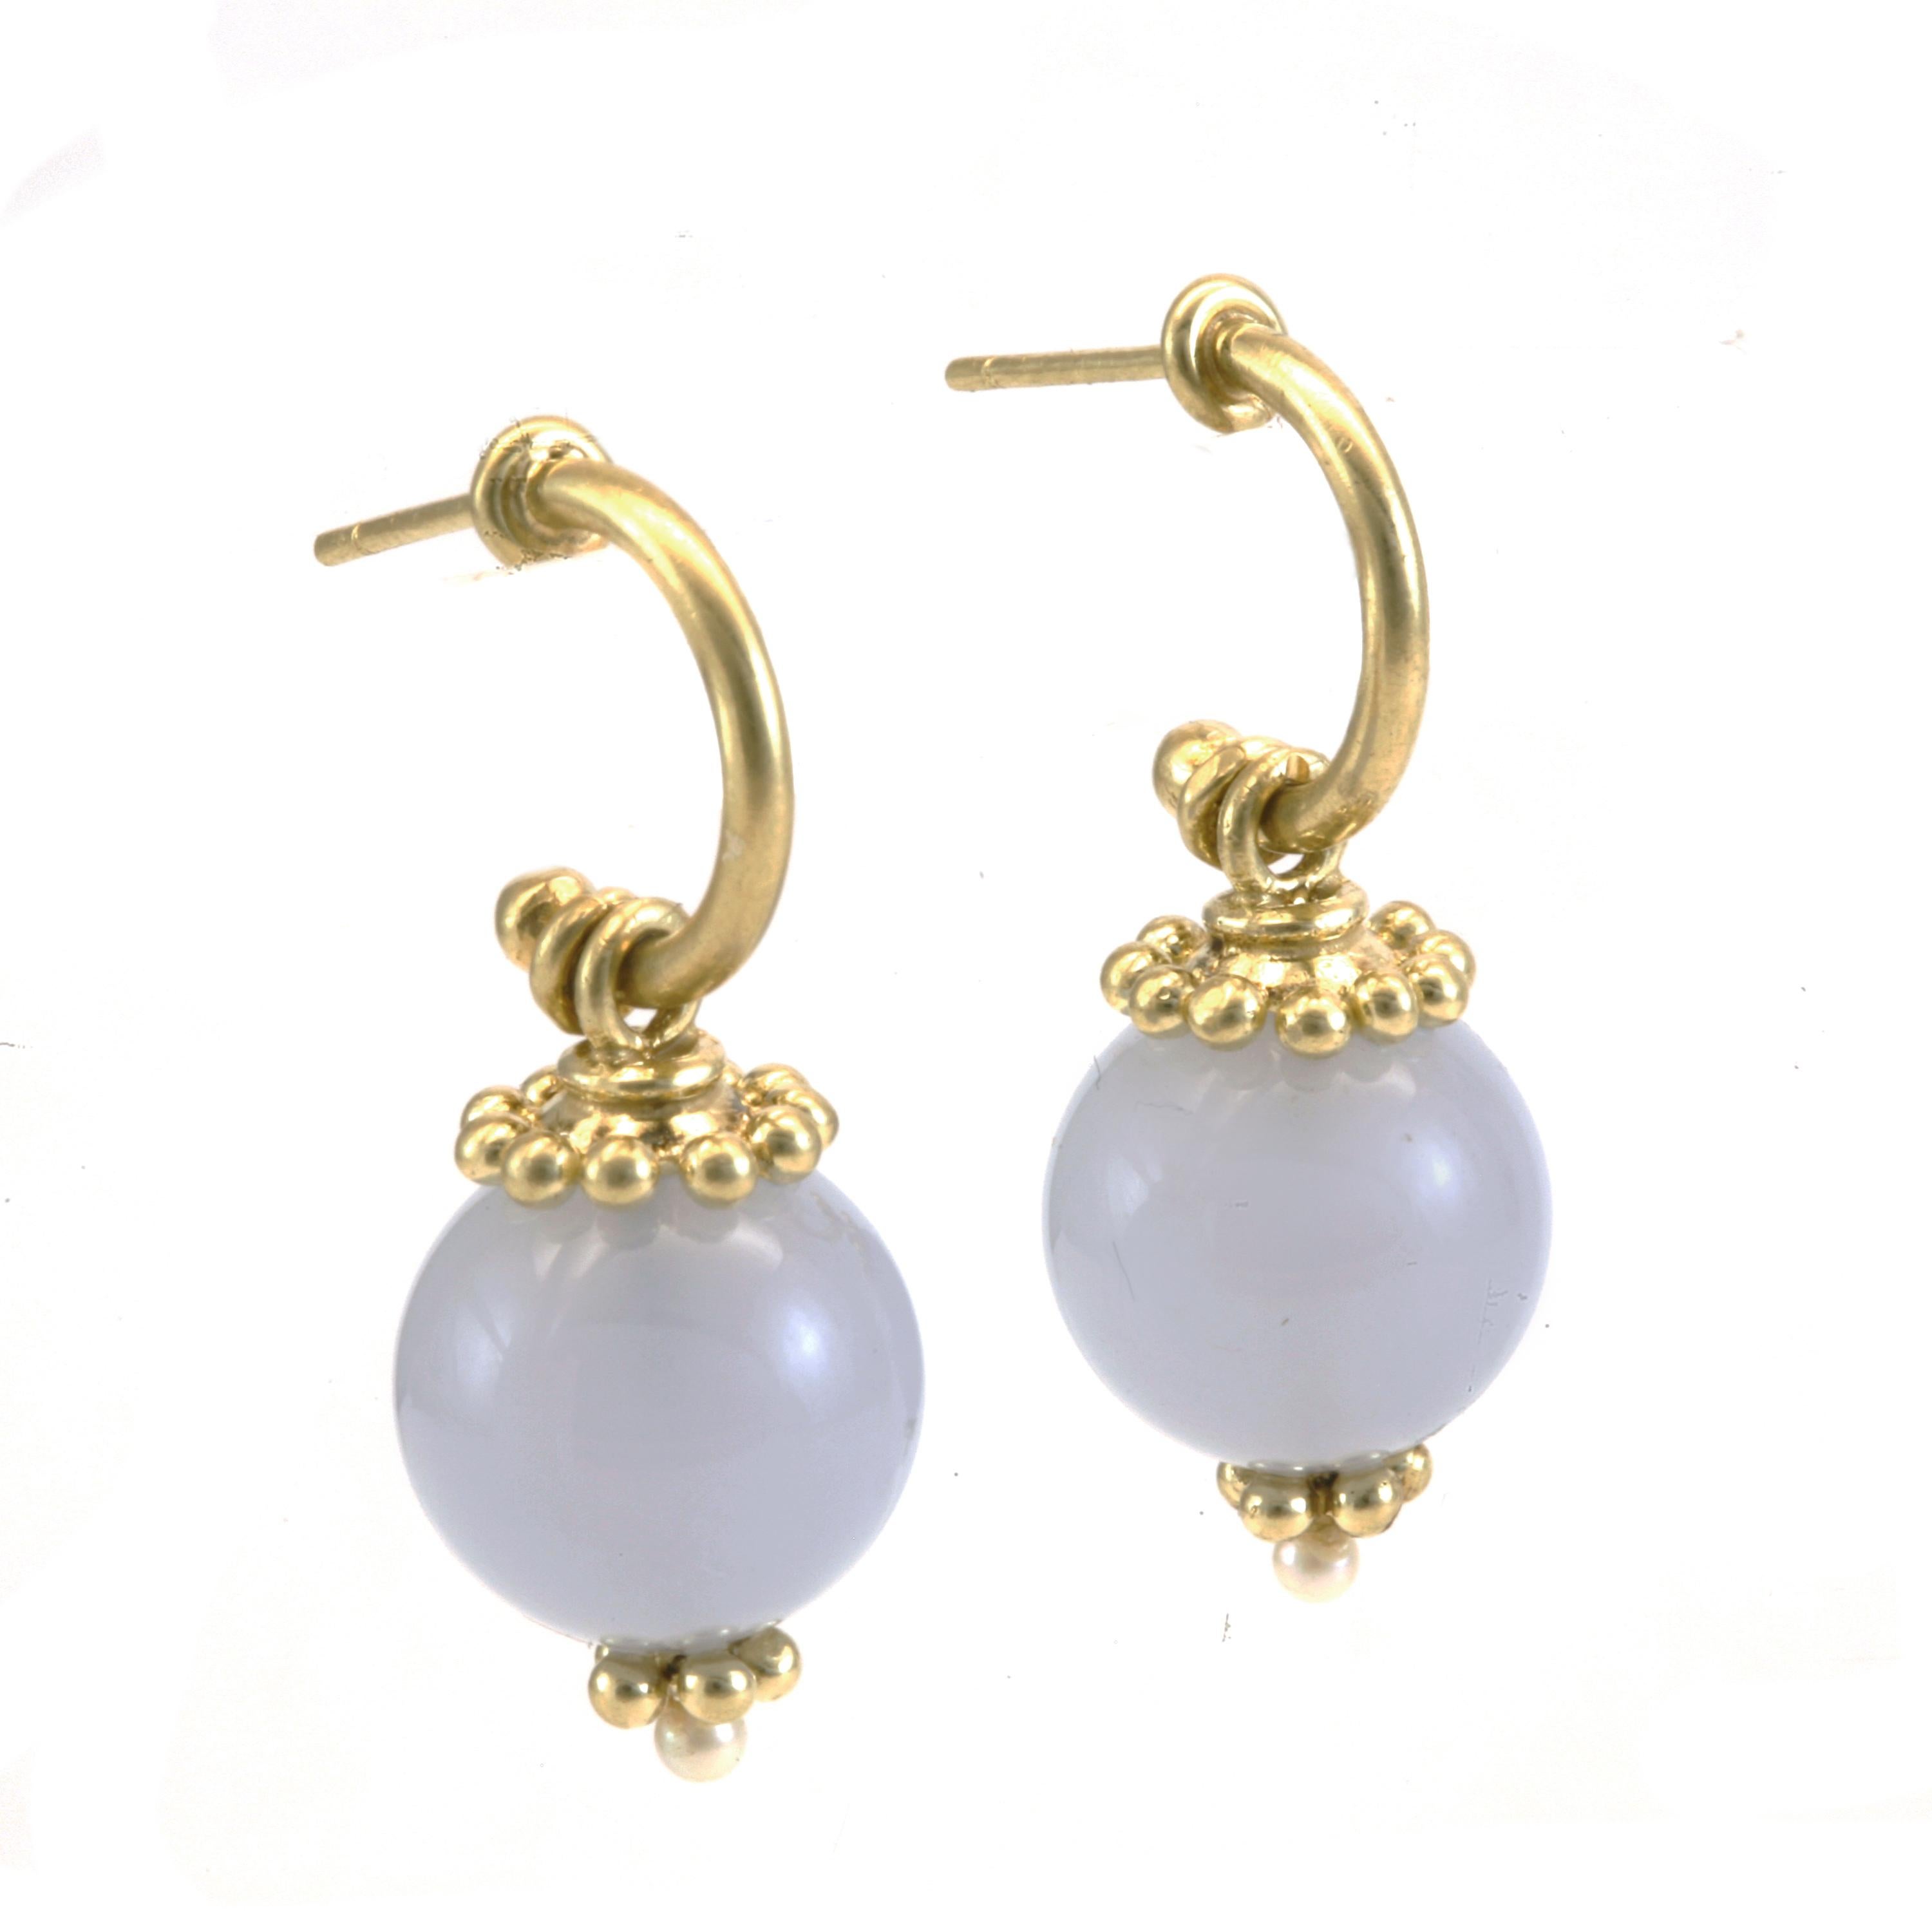 Blue Chalcedony Drop Hoop Earrings in 18k Gold measure 1 1/4 inches. Blue Chalcedony is a gem that flatters any complexion. From the fairest to the deepest complexion. These voluminous beads are suspended with hand fabricated caps and a finial that